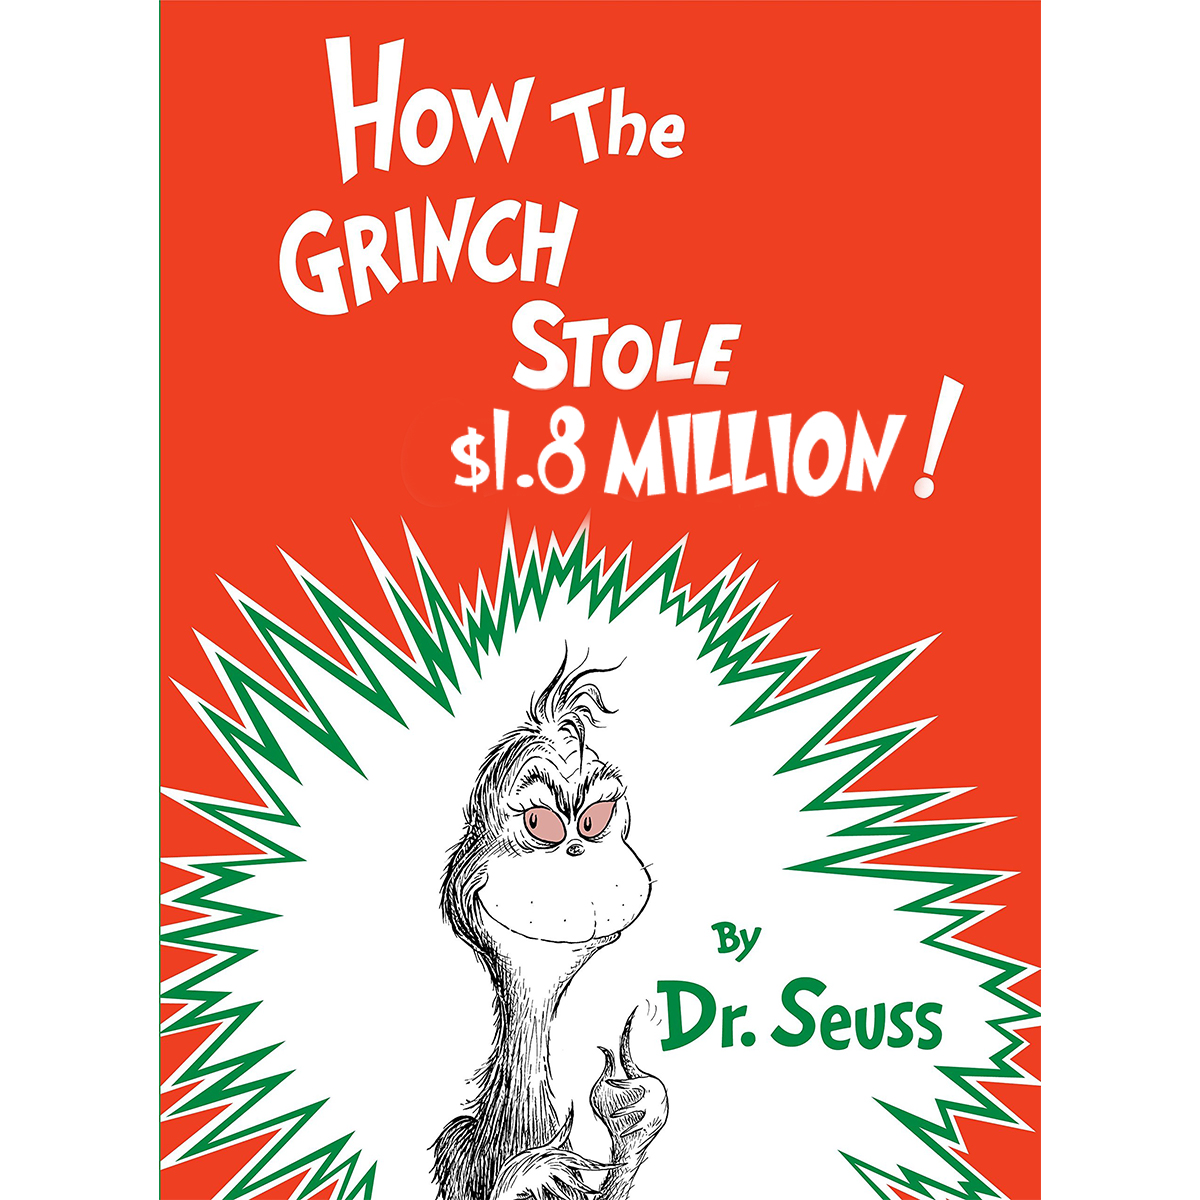 How the Grinch Stole